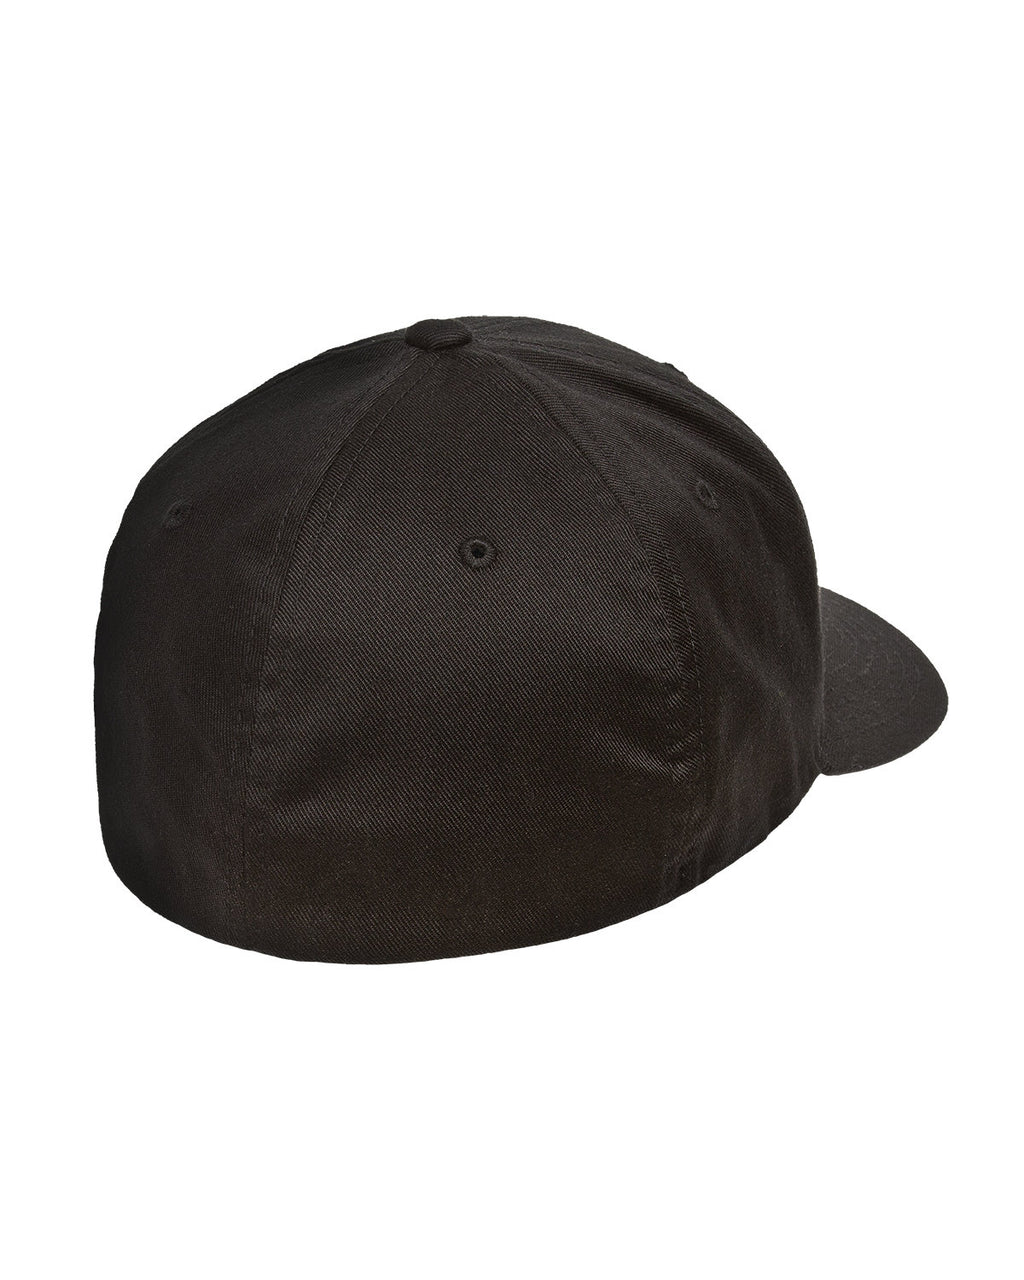 Hats Corporate Cap Flexfit Wooly Combed-Twill Adult Yupoong